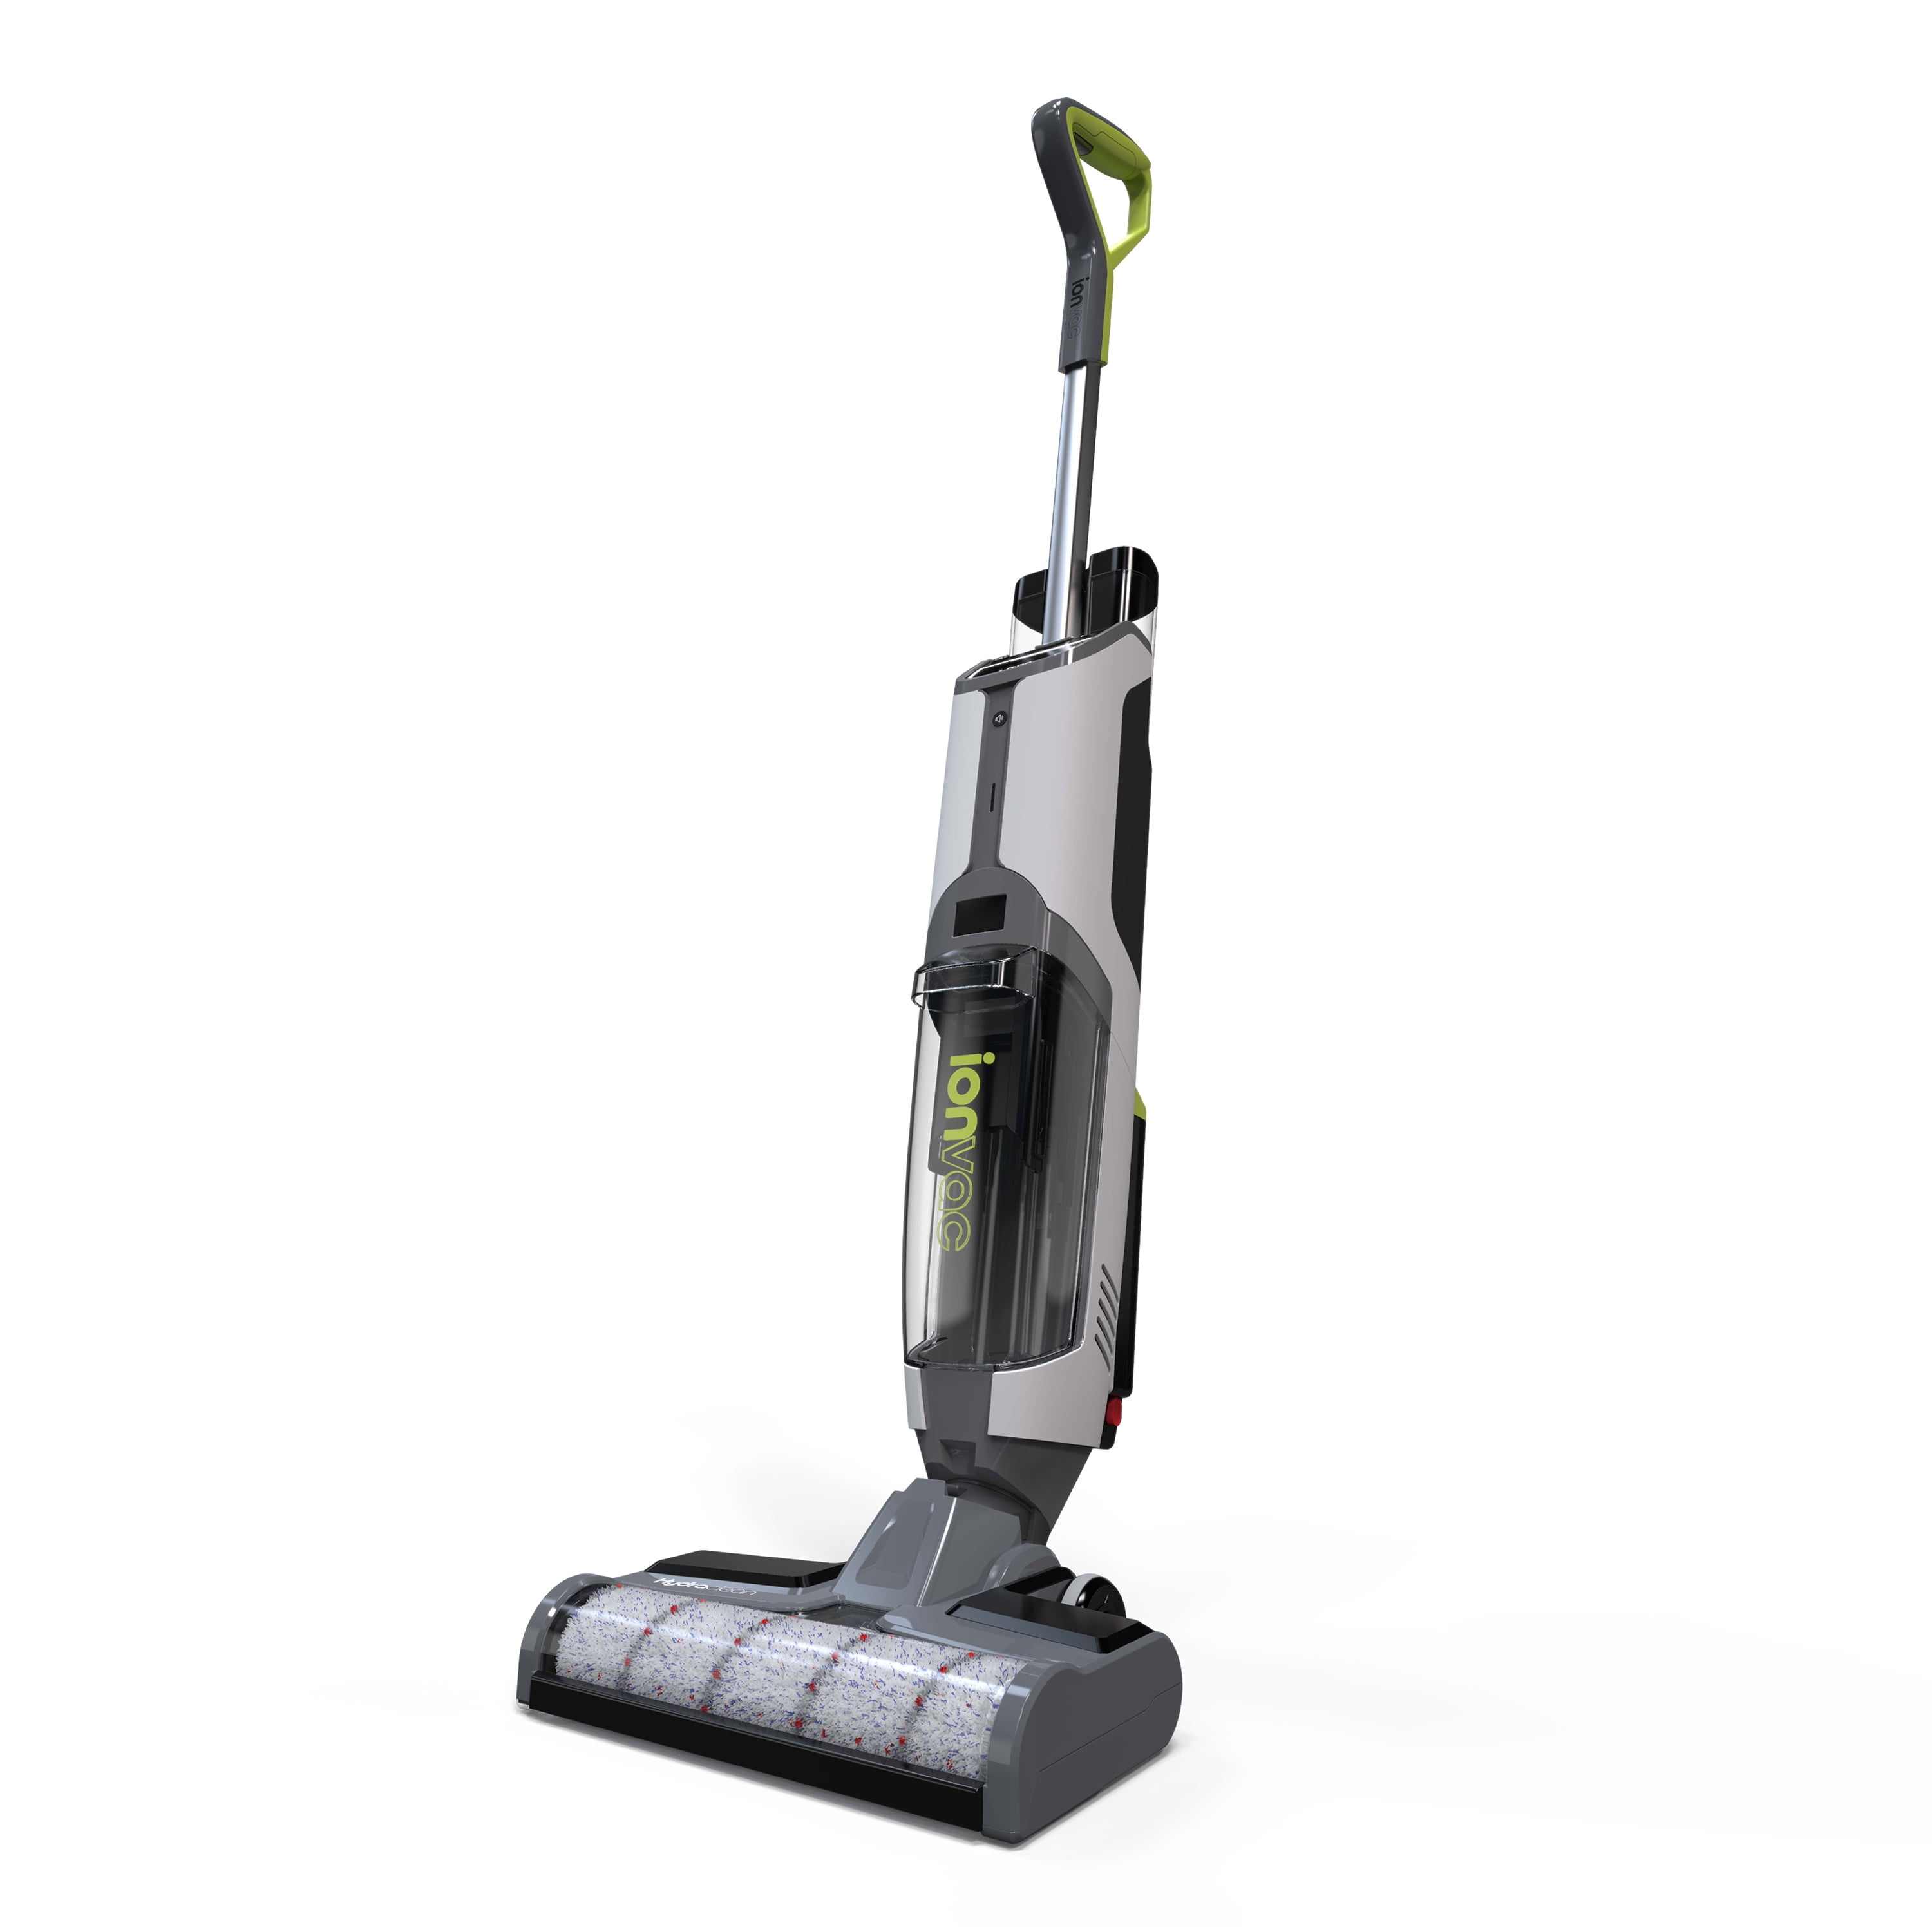 Ionvac Hydraclean Cordless All In One, Vacuum Cleaner For Hardwood Floors